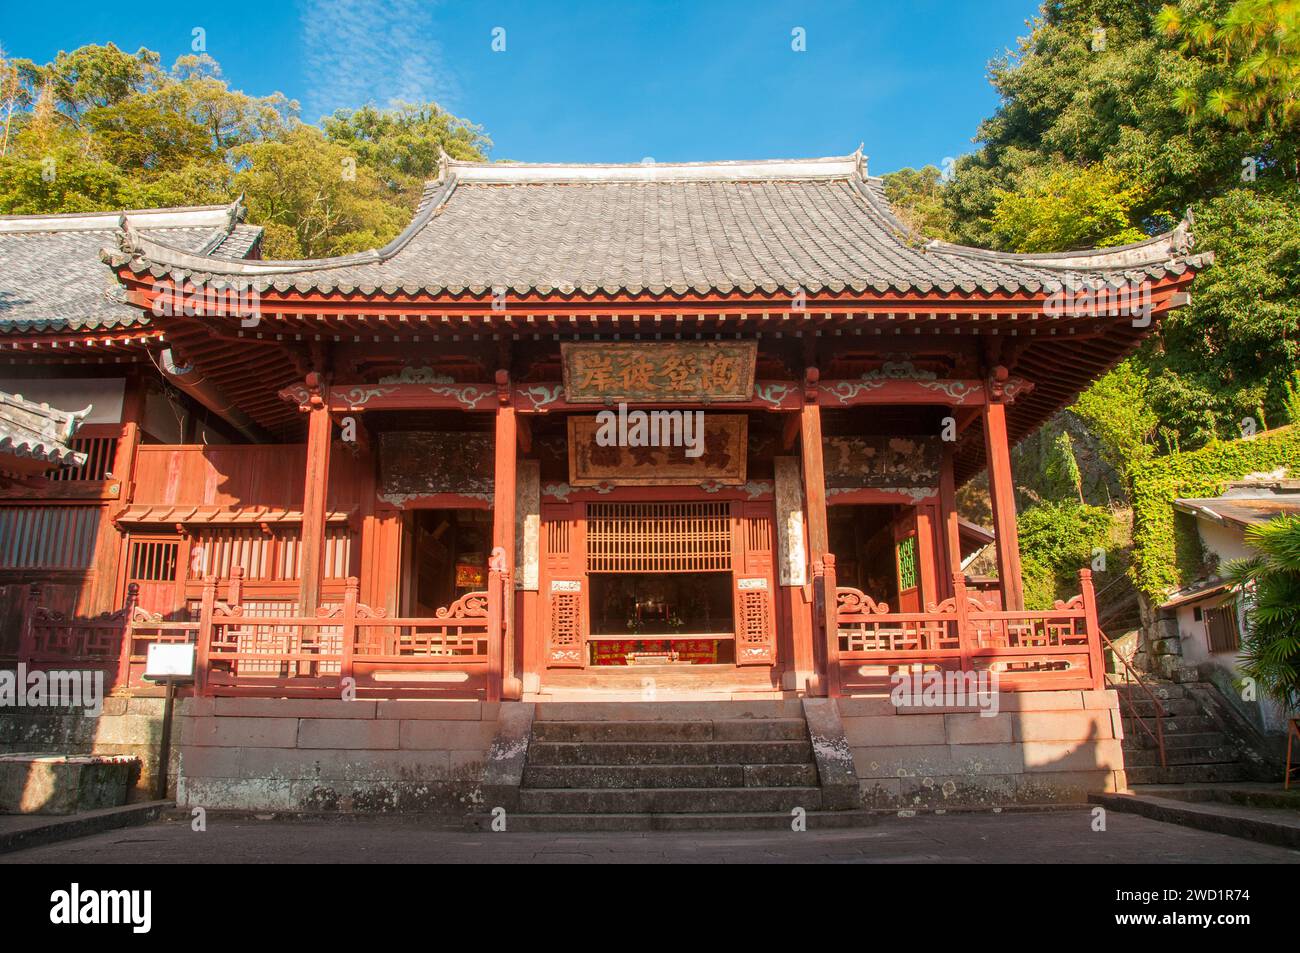 Japan: Small temple dedicated to Maso, goddess of the sea, Sofuku-ji, Obaku Zen temple, Nagasaki, Kyushu. The temple, an example of Ming dynasty (1368 - 1644), southern Chinese architecture, dates from 1629 and was built by a Chinese monk named Chaonian. Stock Photo